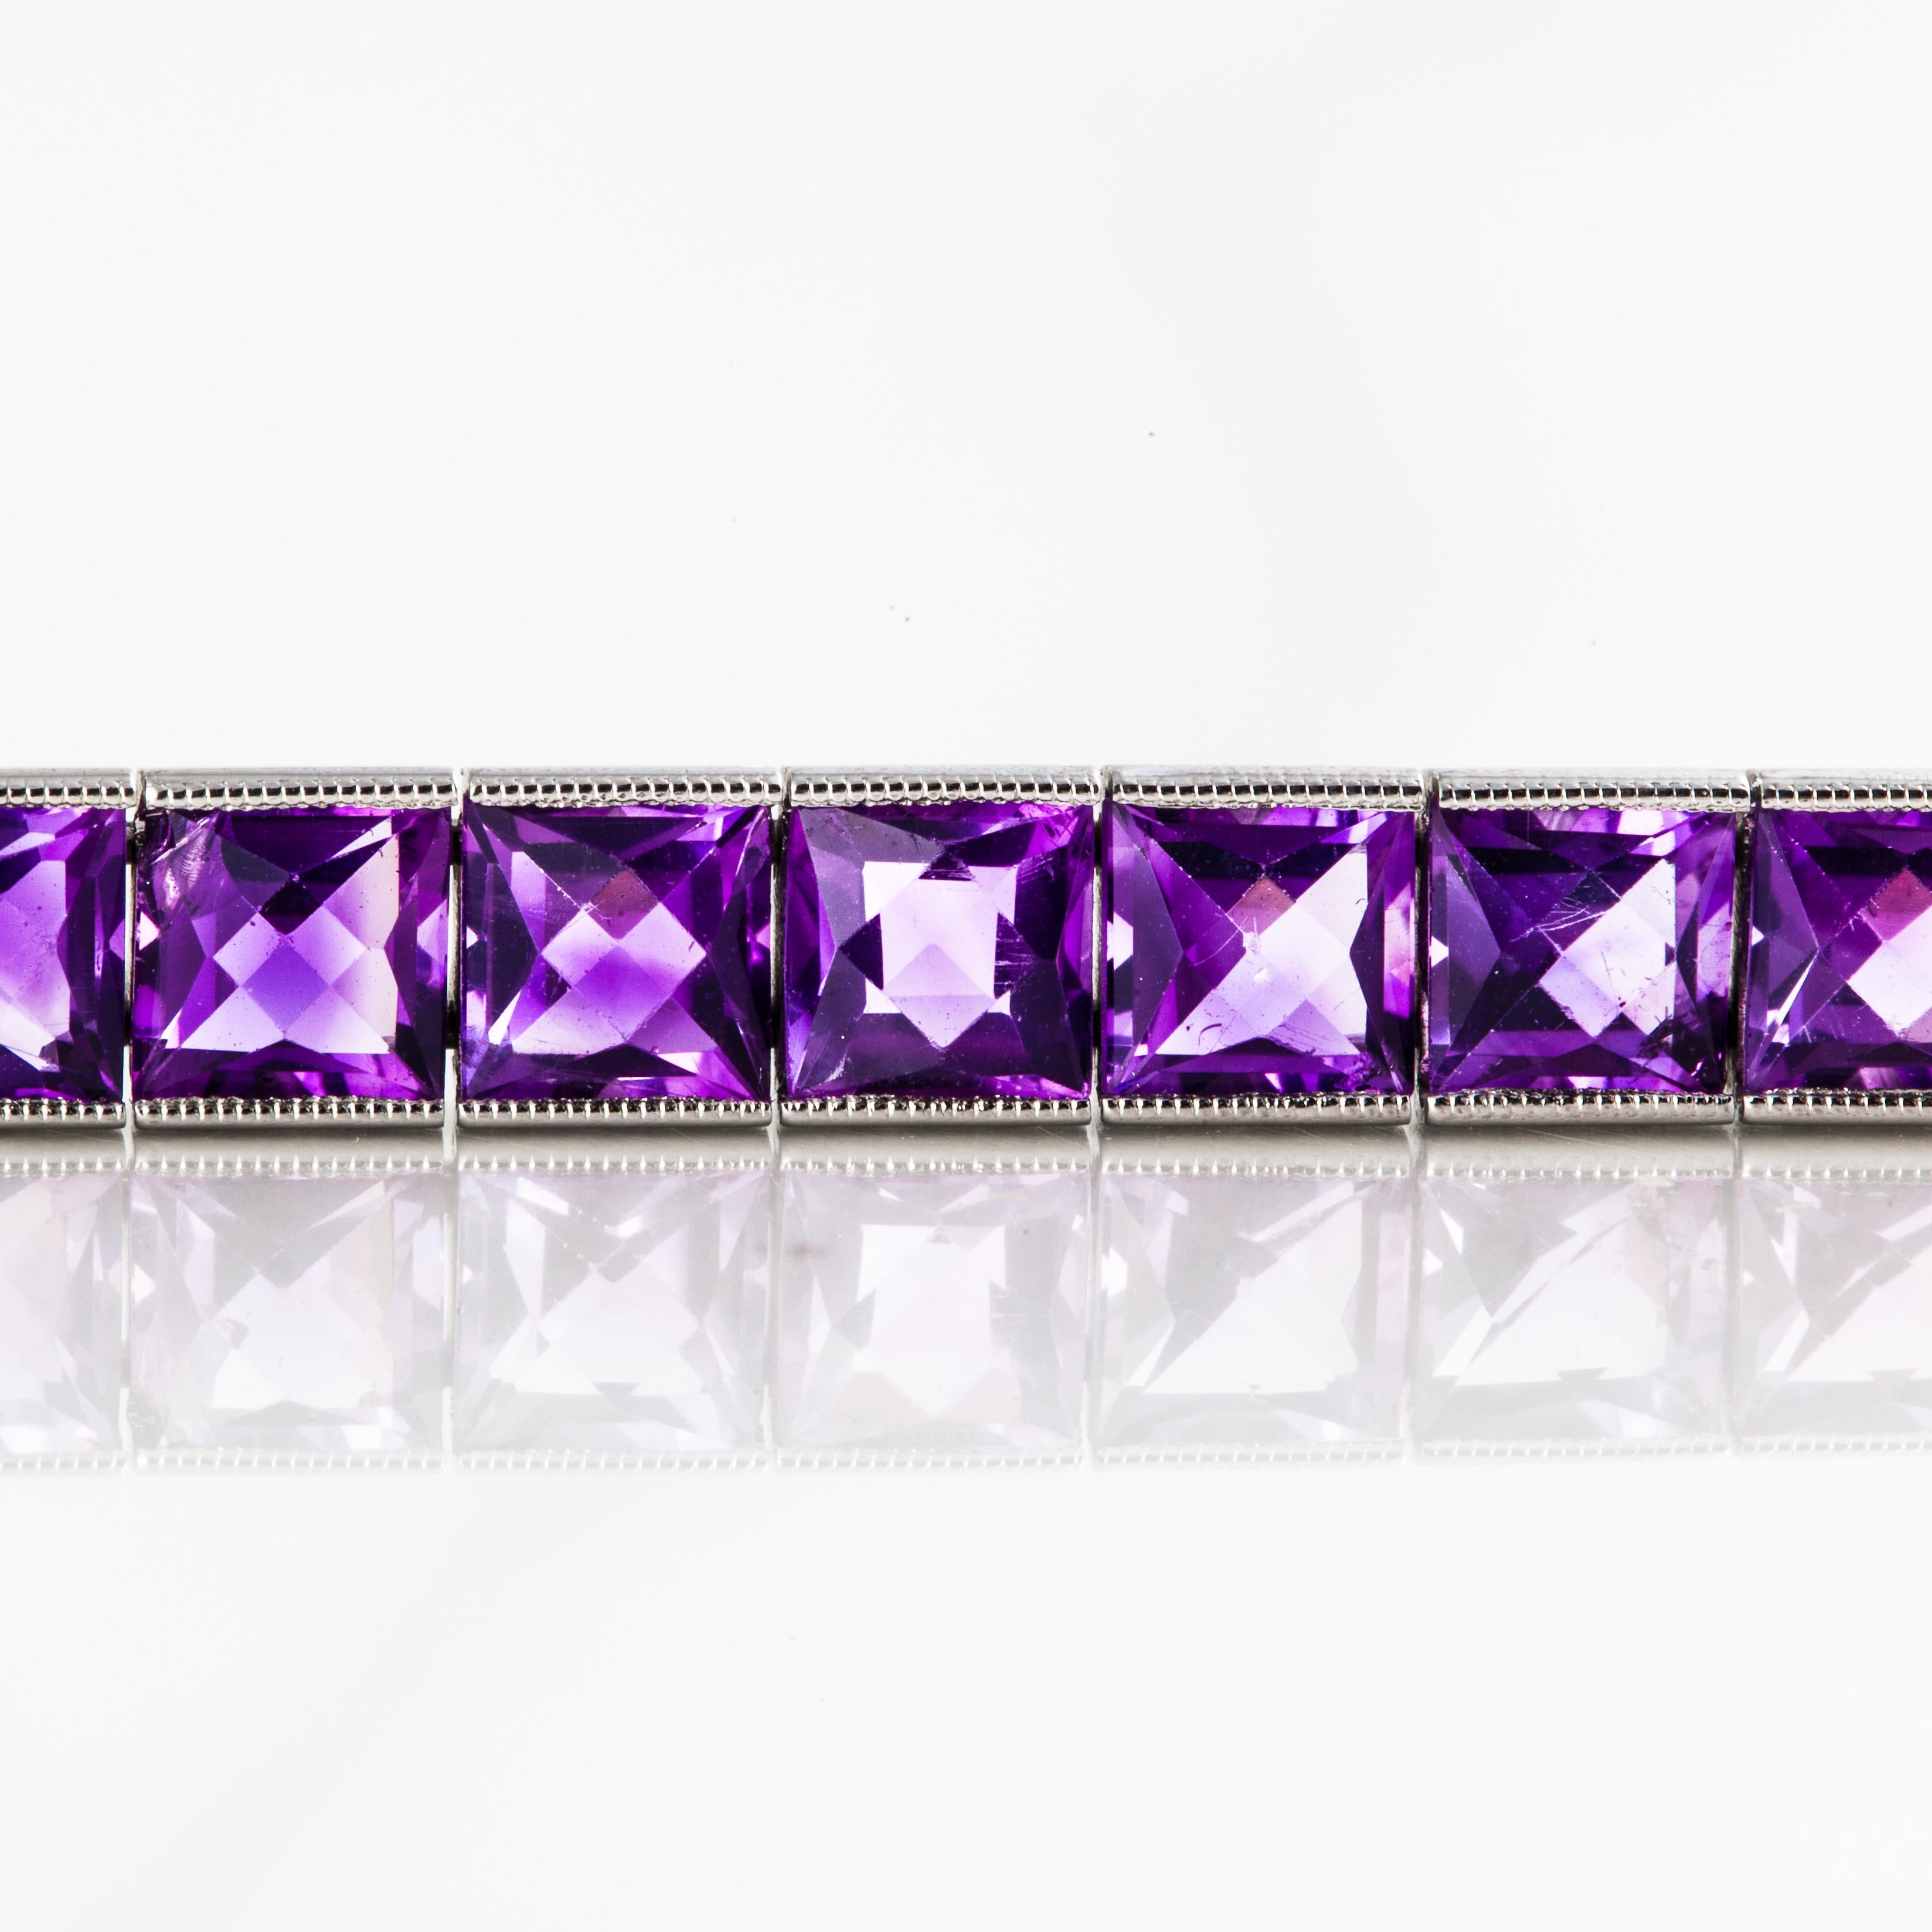 Line bracelet composed of 14K white gold featuring square-cut amethyst stones.  There are 37 faceted amethysts that total 22.20 carats. The bracelet is engraved on both sides with a tongue closure and safety clasp on the underside.  It measures 7